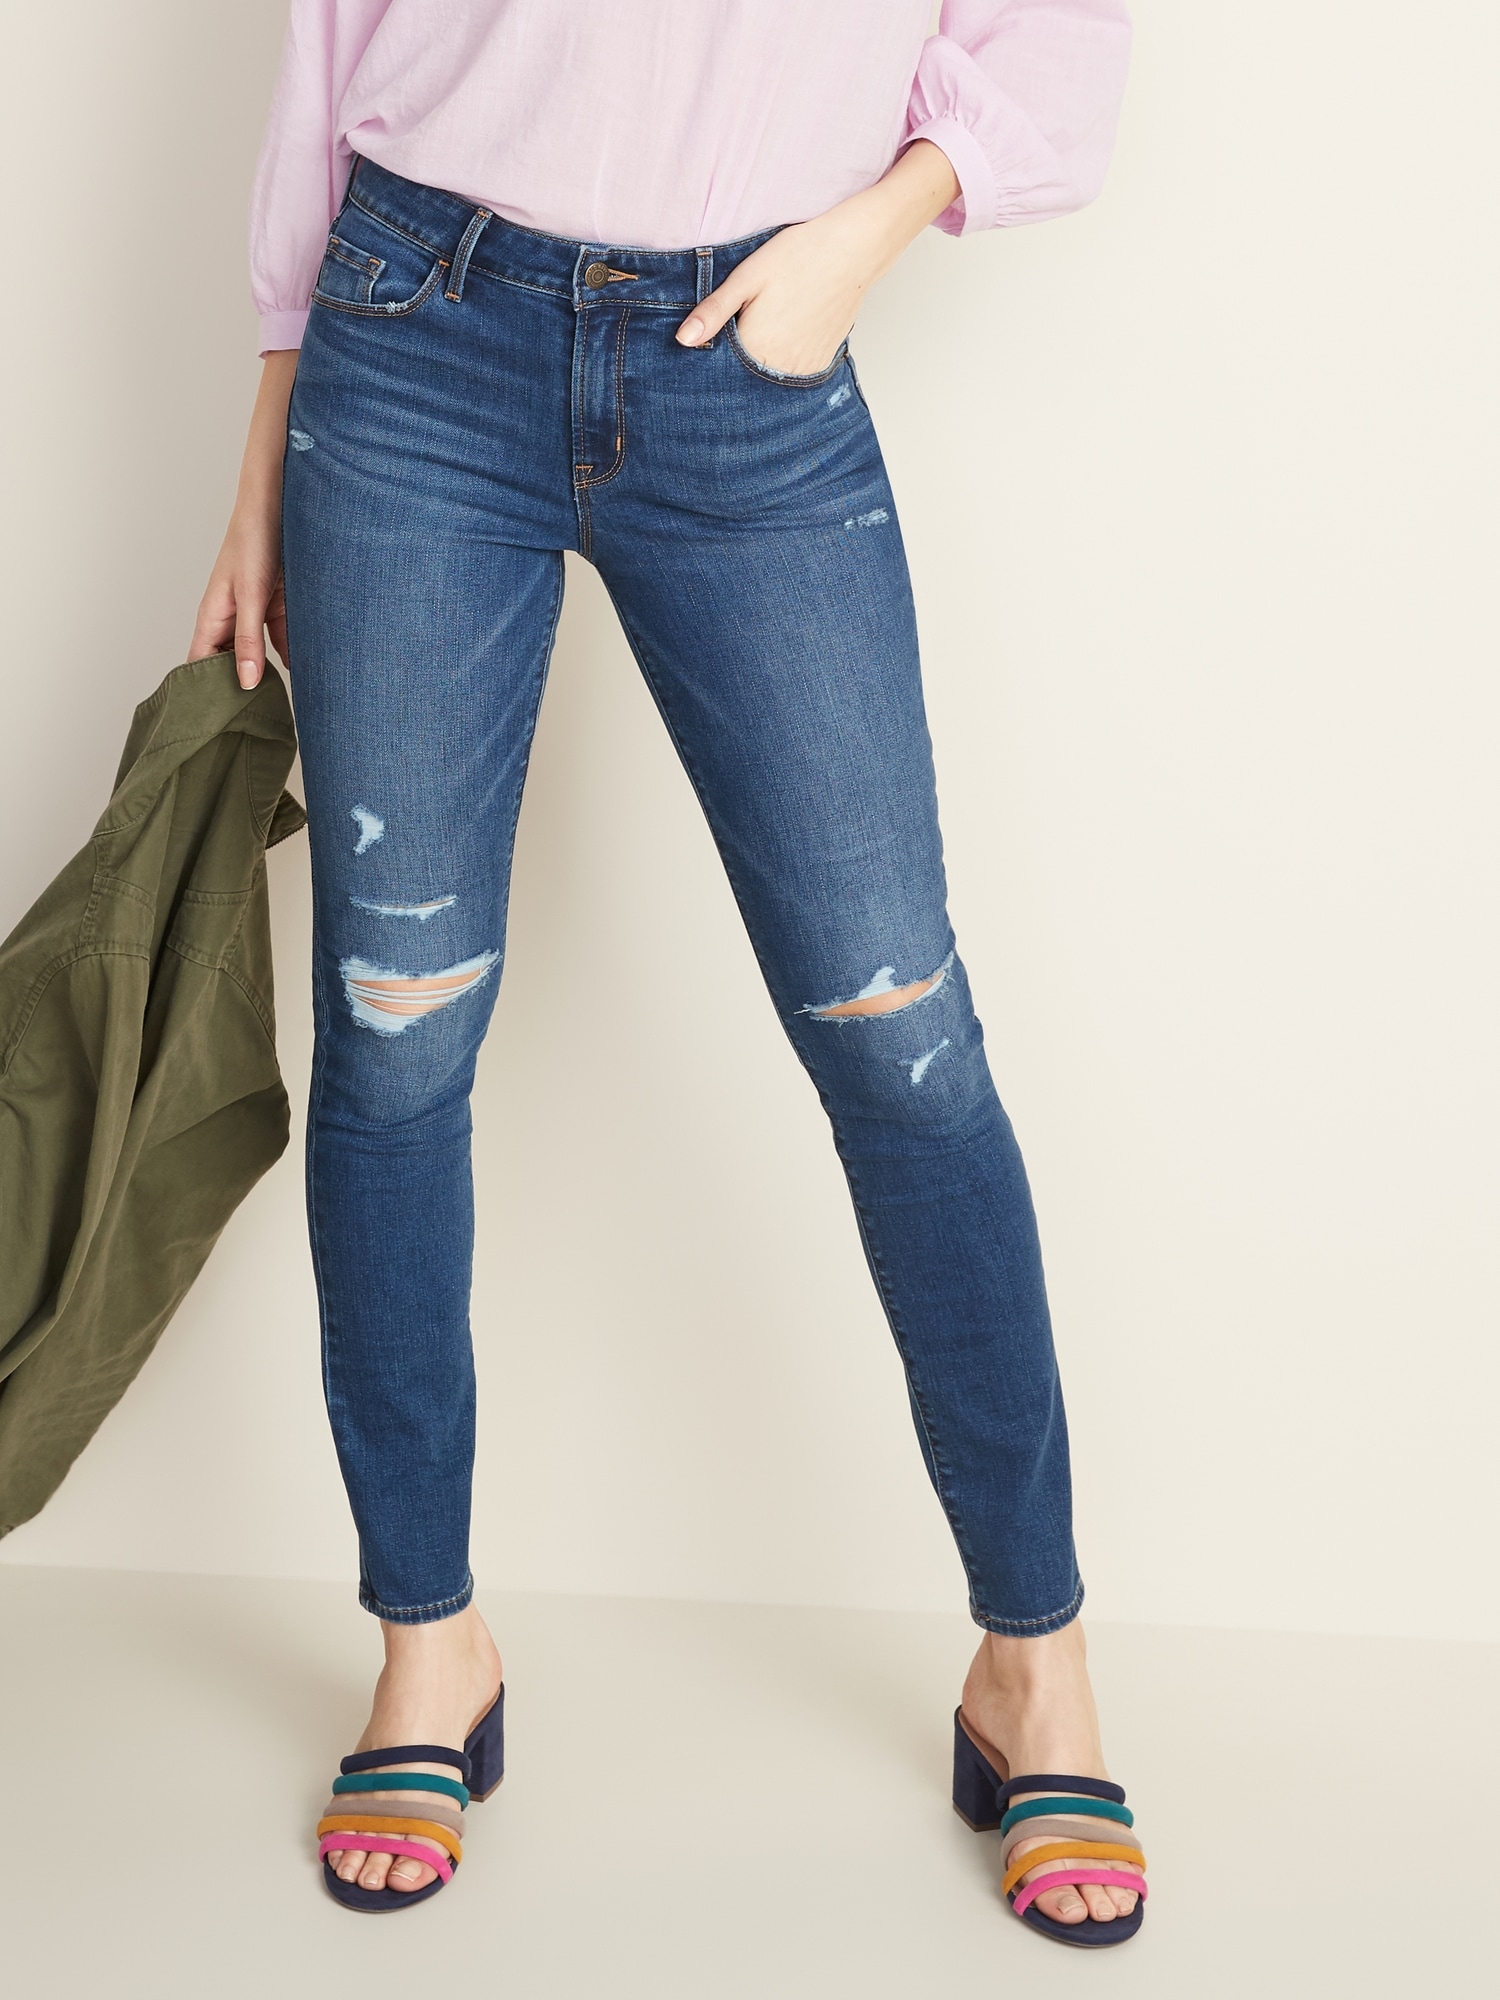 jeans in old navy